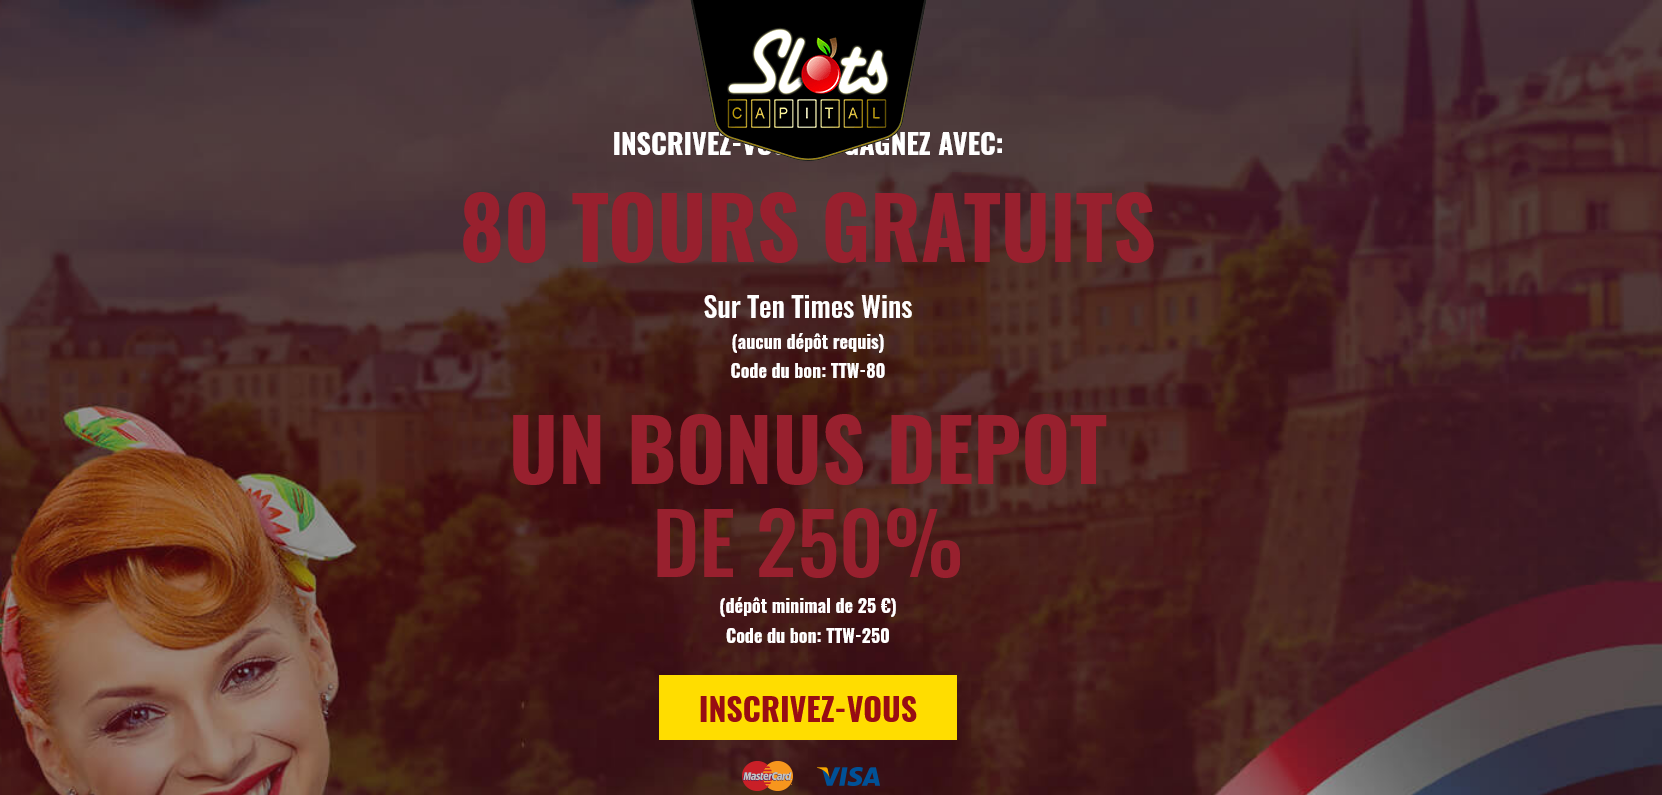 Slots Capital LU 80 Free Spins
                                                      (Luxembourg)